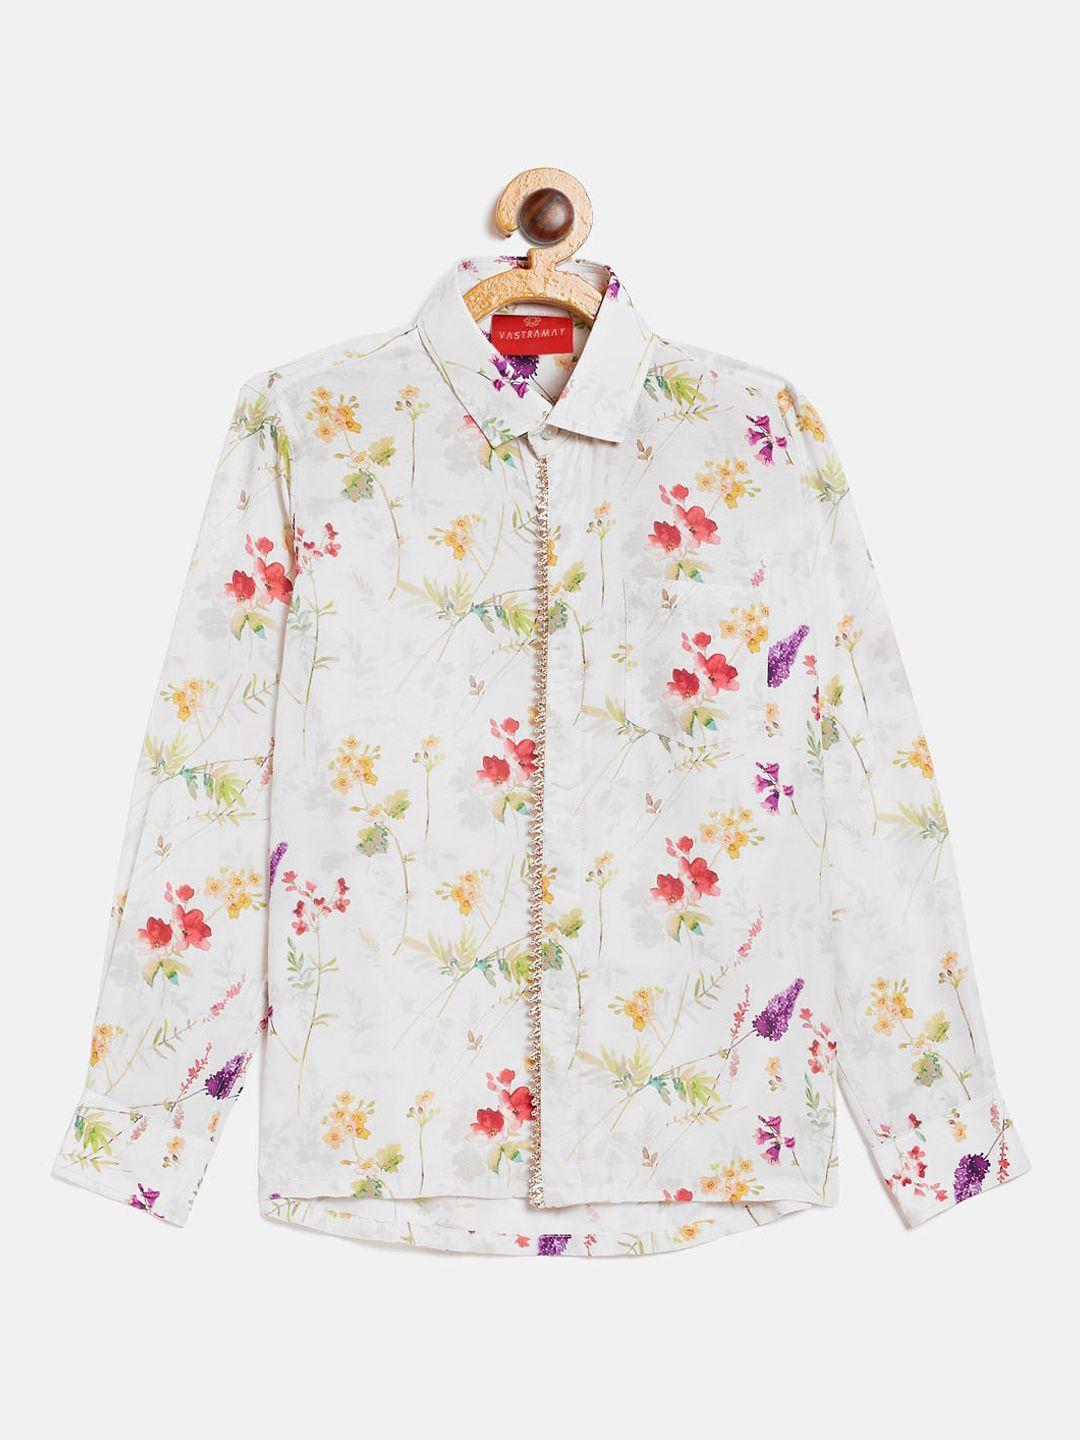 vastramay boys cream-coloured & red floral opaque printed shirt